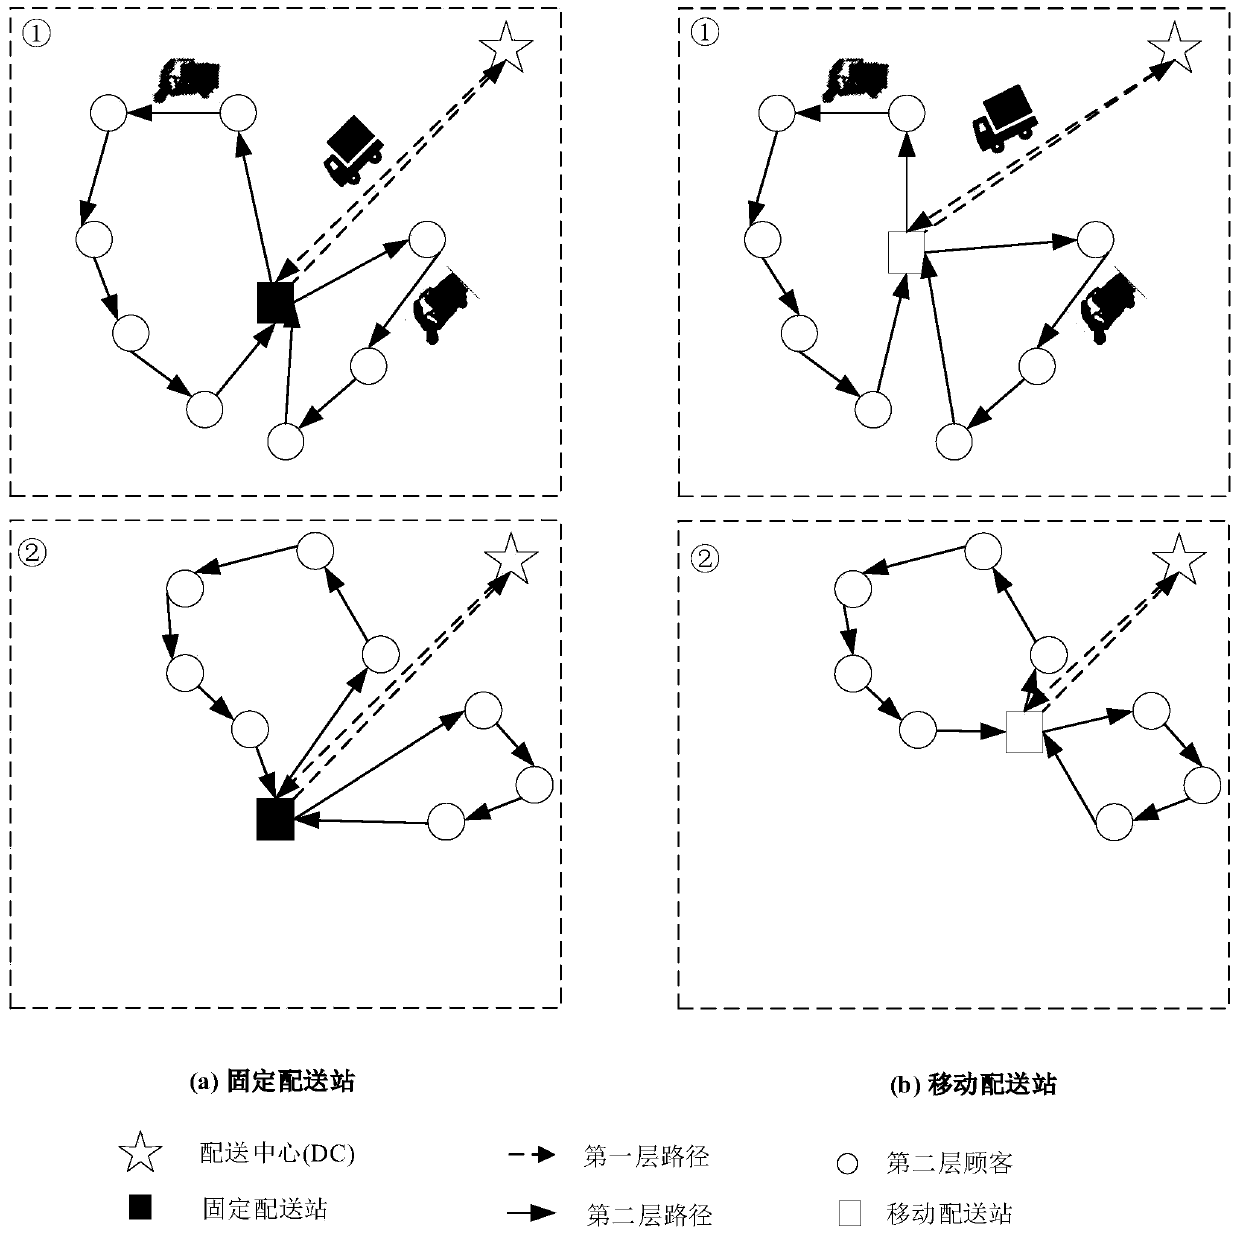 Urban two-stage distribution and scheduling method with mobile distribution station